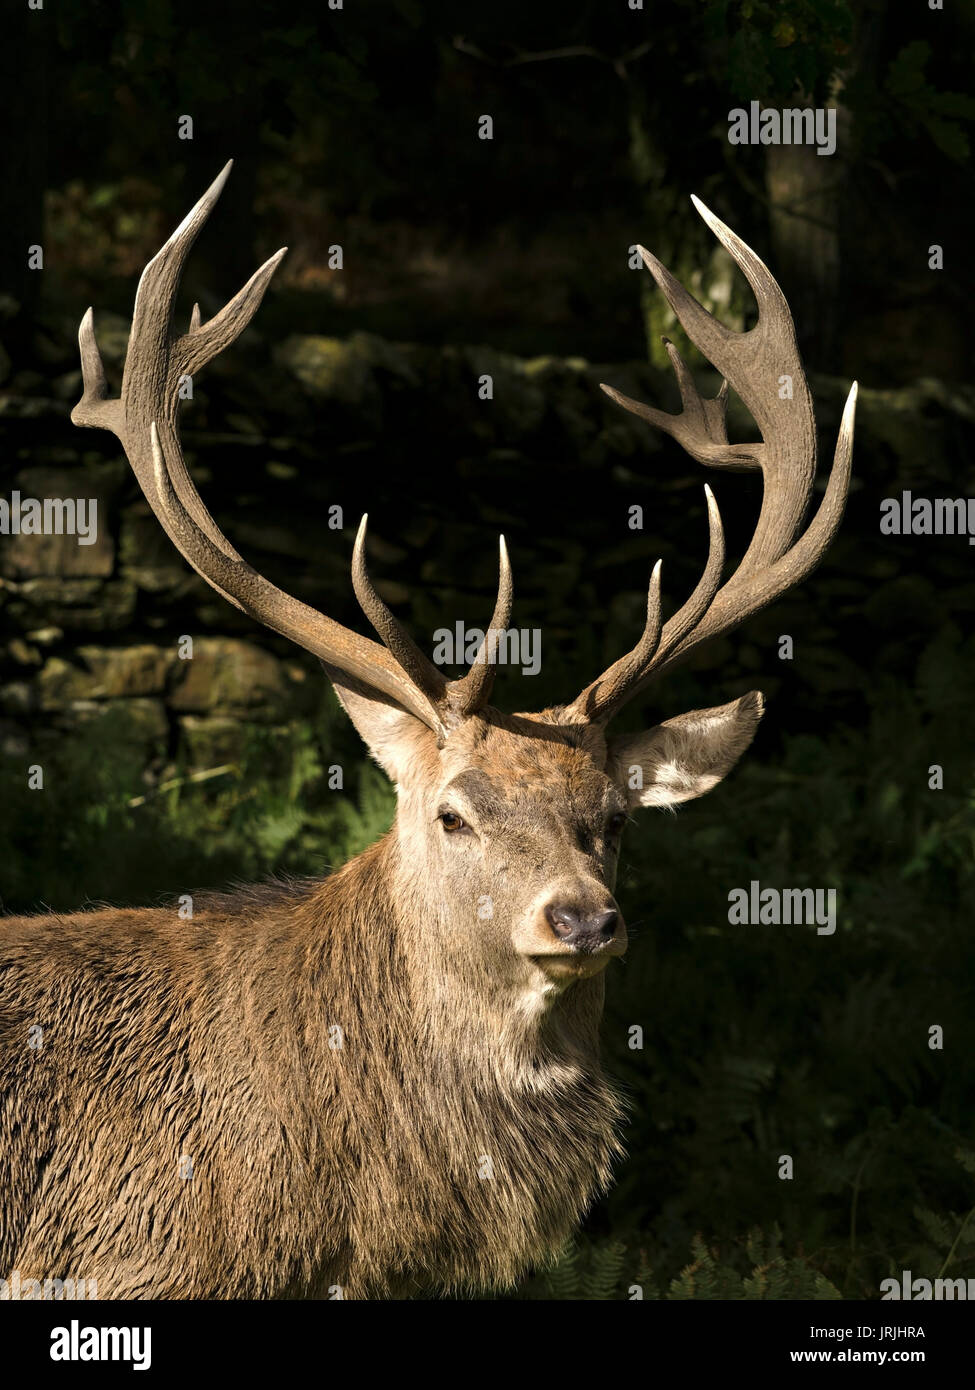 Large red deer stag with crown of magnificent antlers, sunlit against dark background,Charnwood Forest,Leicestershire,England,UK Stock Photo